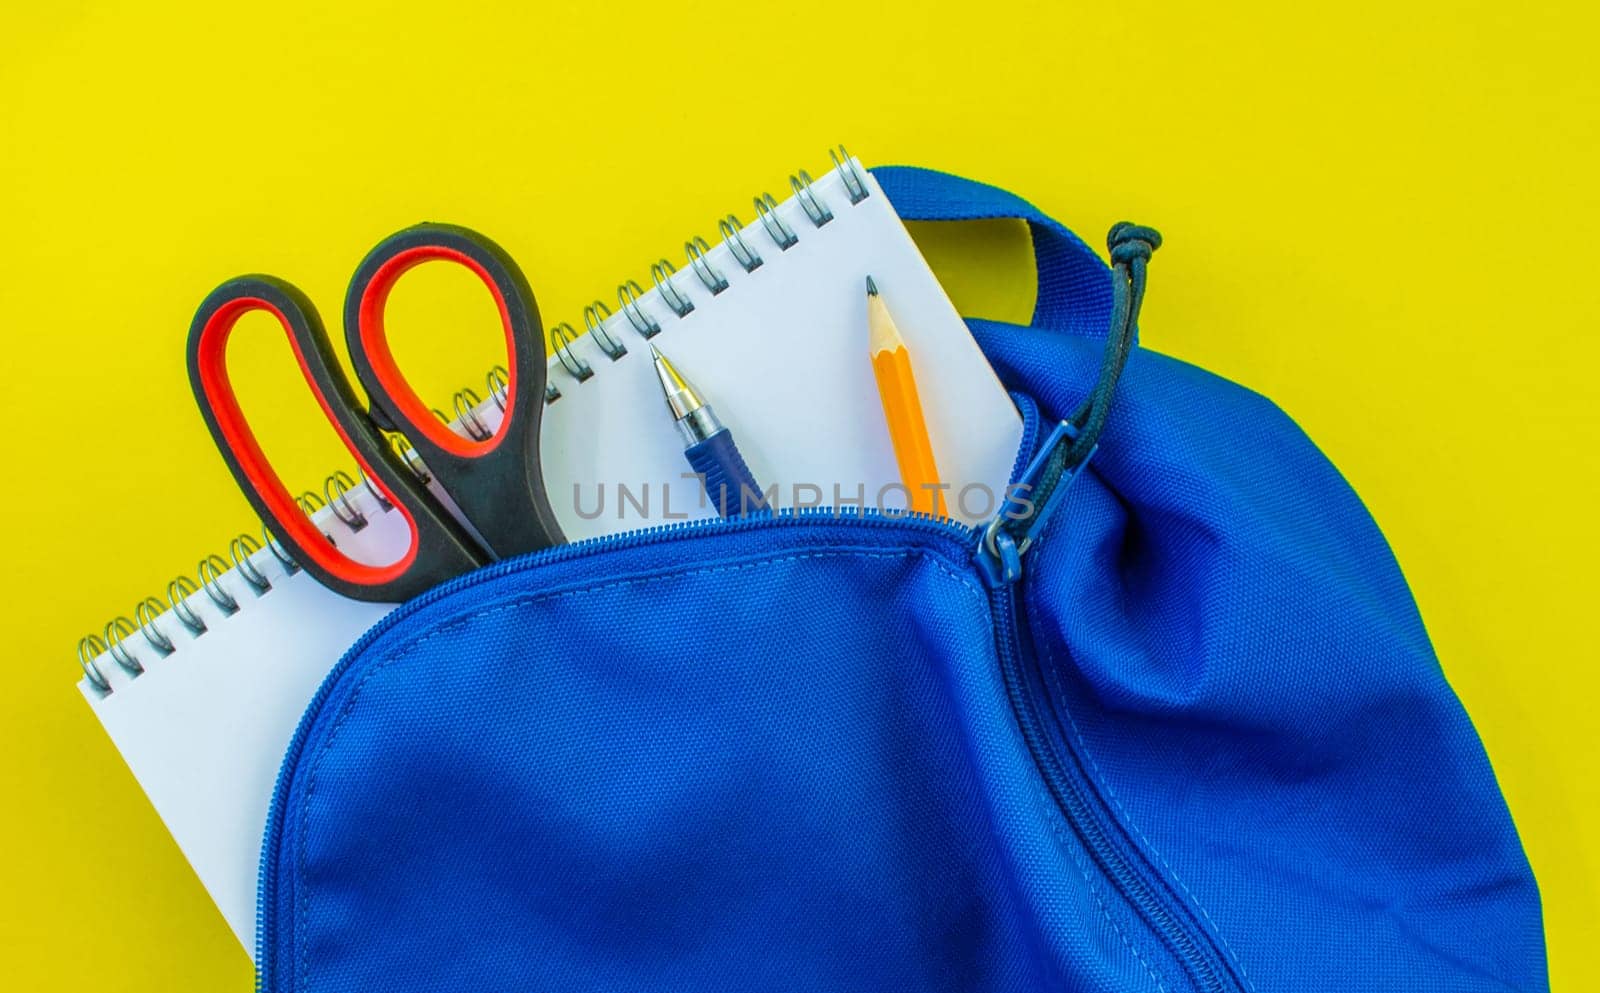 School backpack, pencil, pen, scissors and notepad on a yellow background. School blue backpack with notepad, pencil, scissors and pen inside on a yellow background.